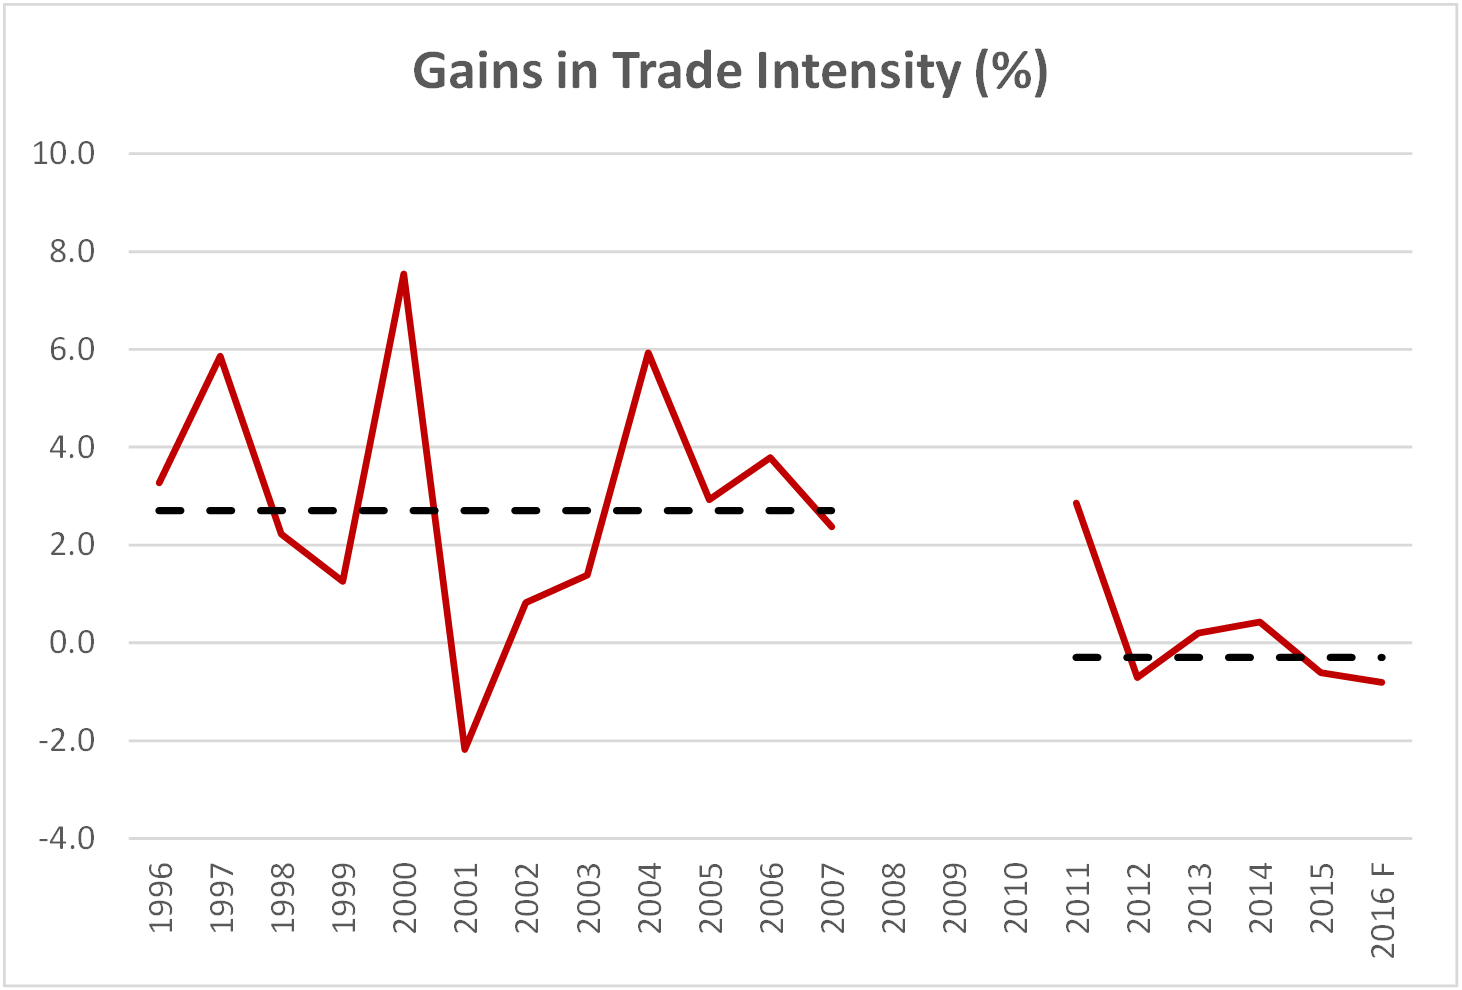 Chart 1.6 - Gains in Trade Intensity